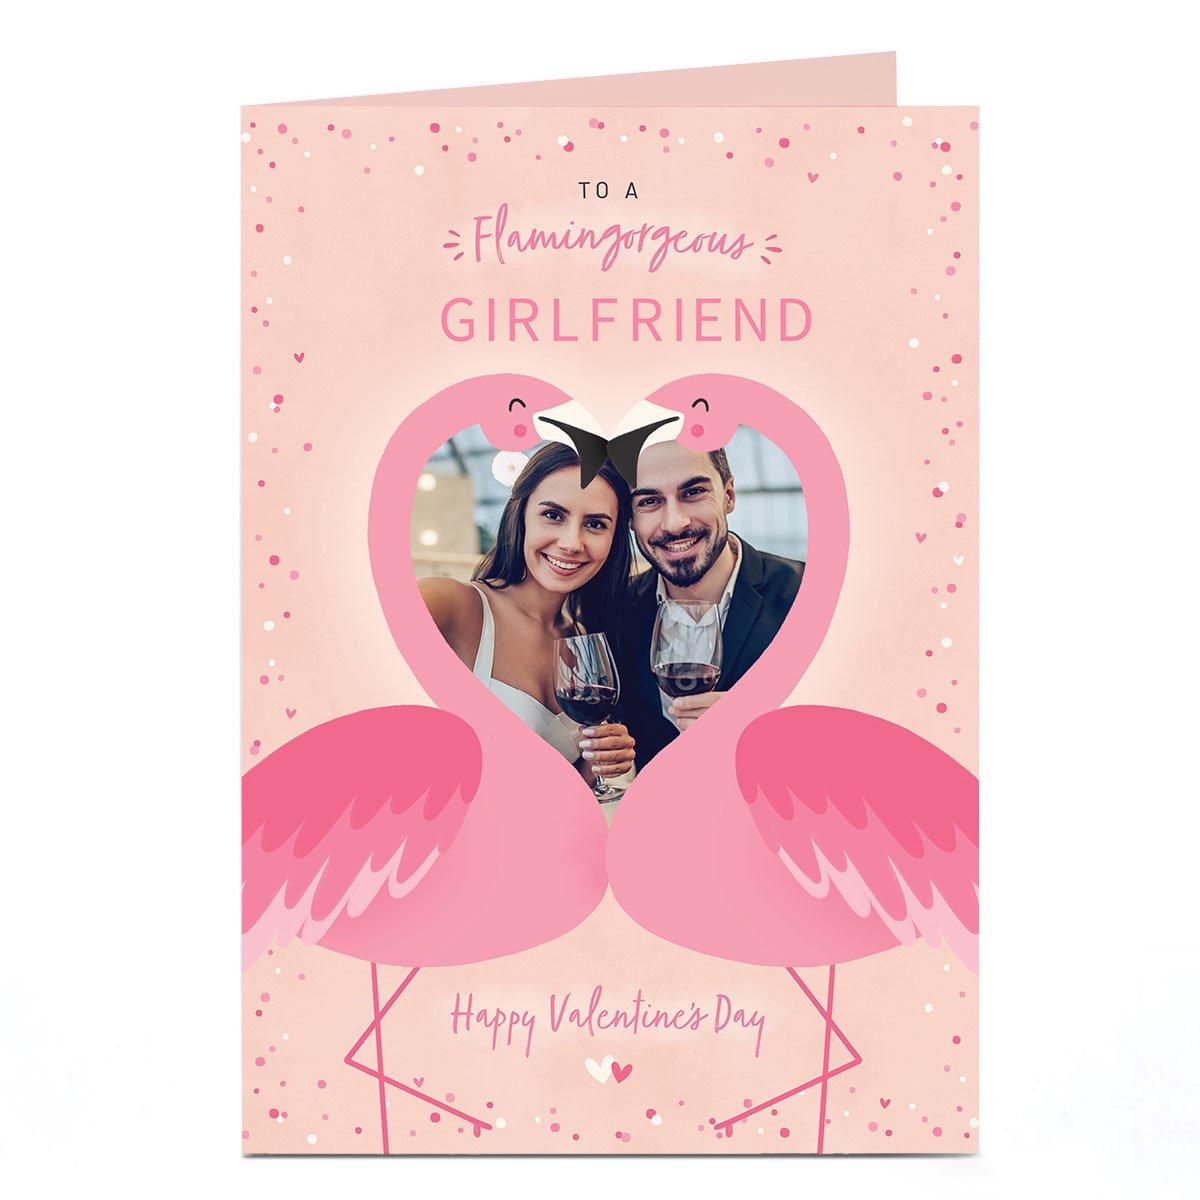 A4 Photo Valentine's Day Card - Flamingorgeous Girlfriend